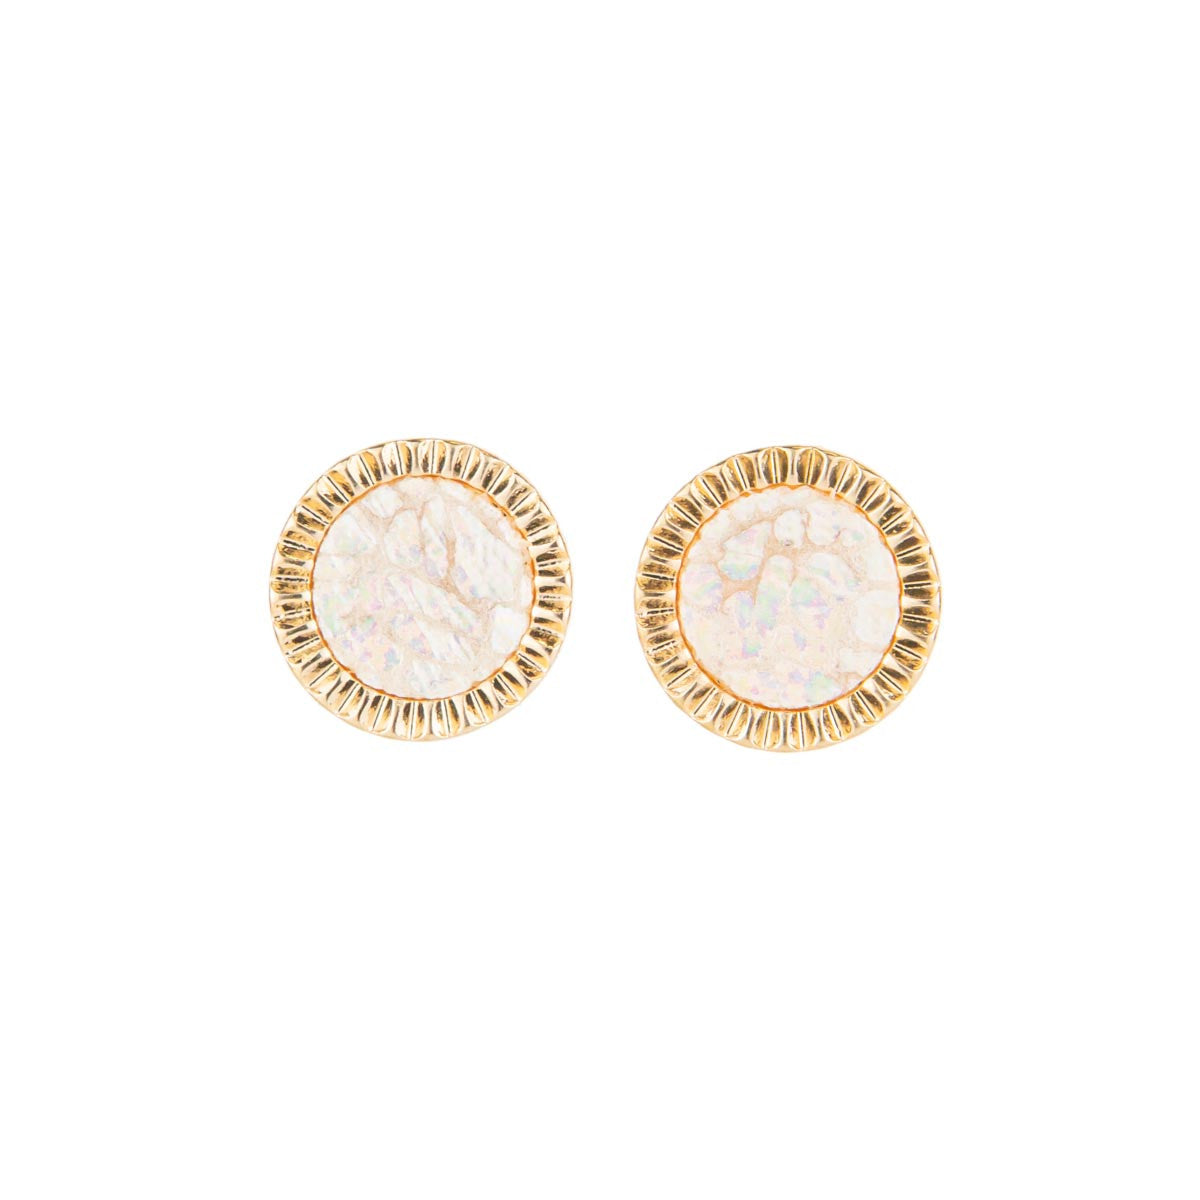 Beauvais Stud Earrings in Gold/White